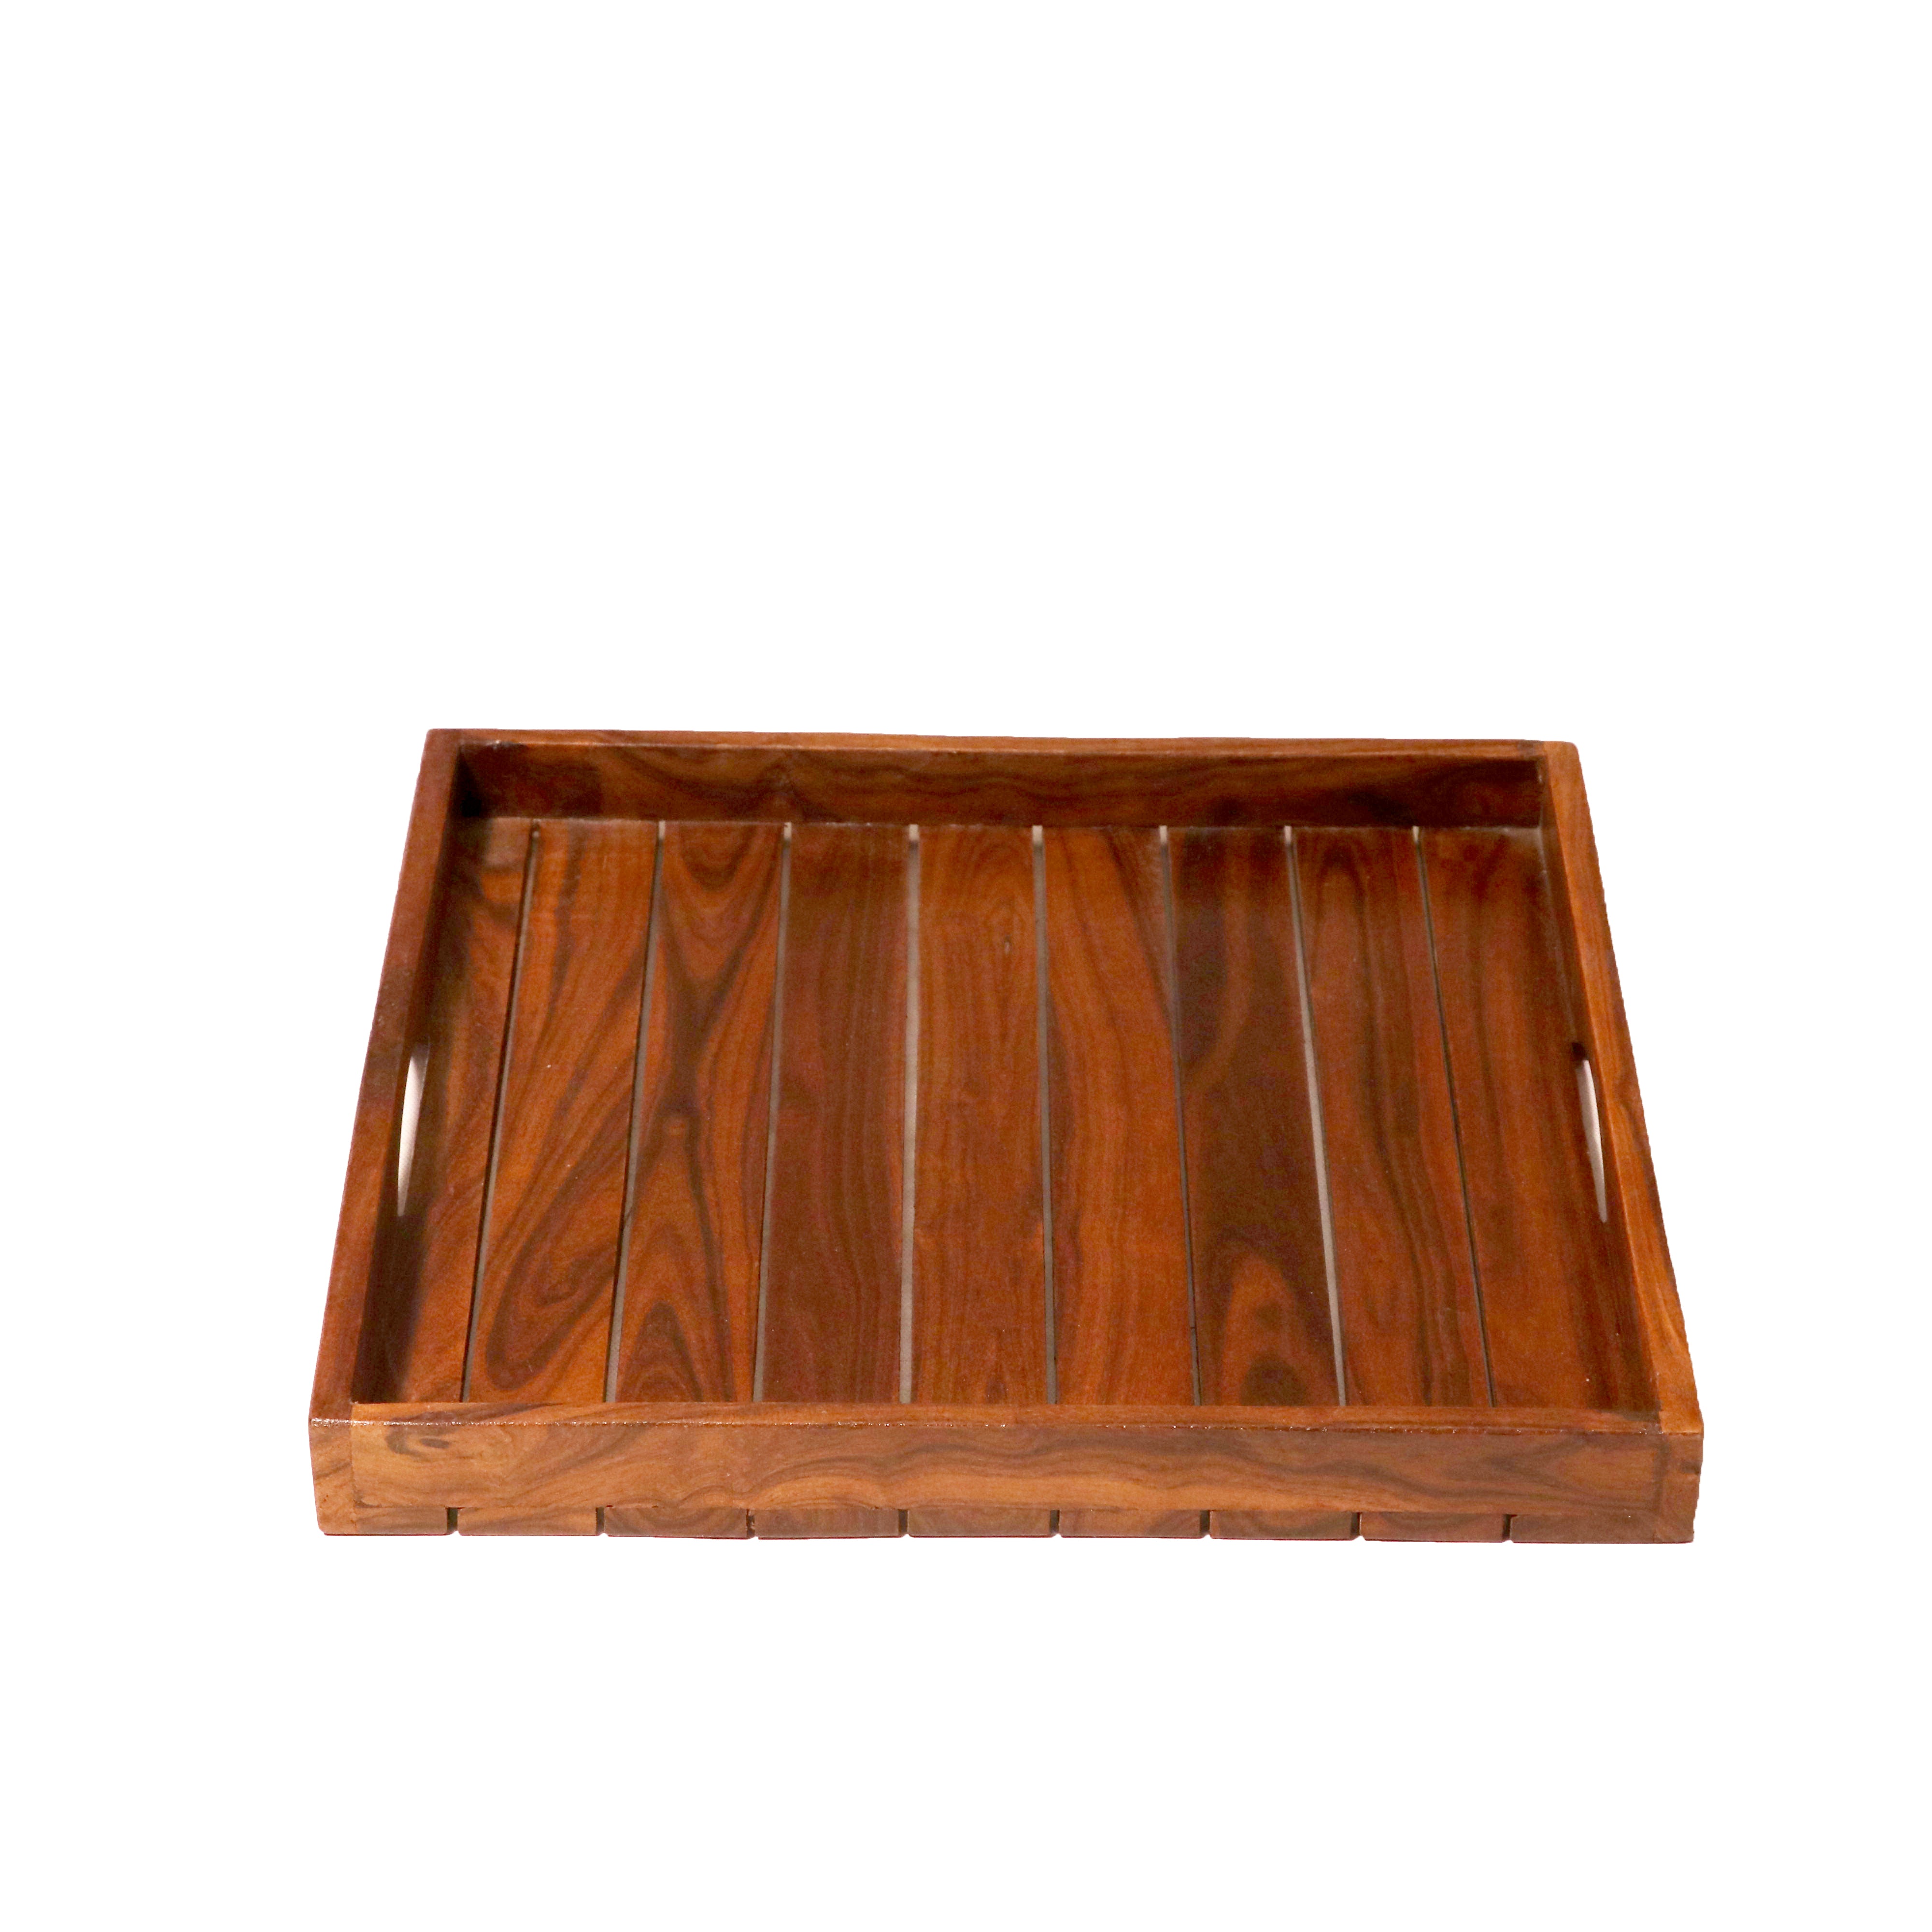 Classic Simple Strip Designed Handmade Wooden Tray - Set of 3 Tray